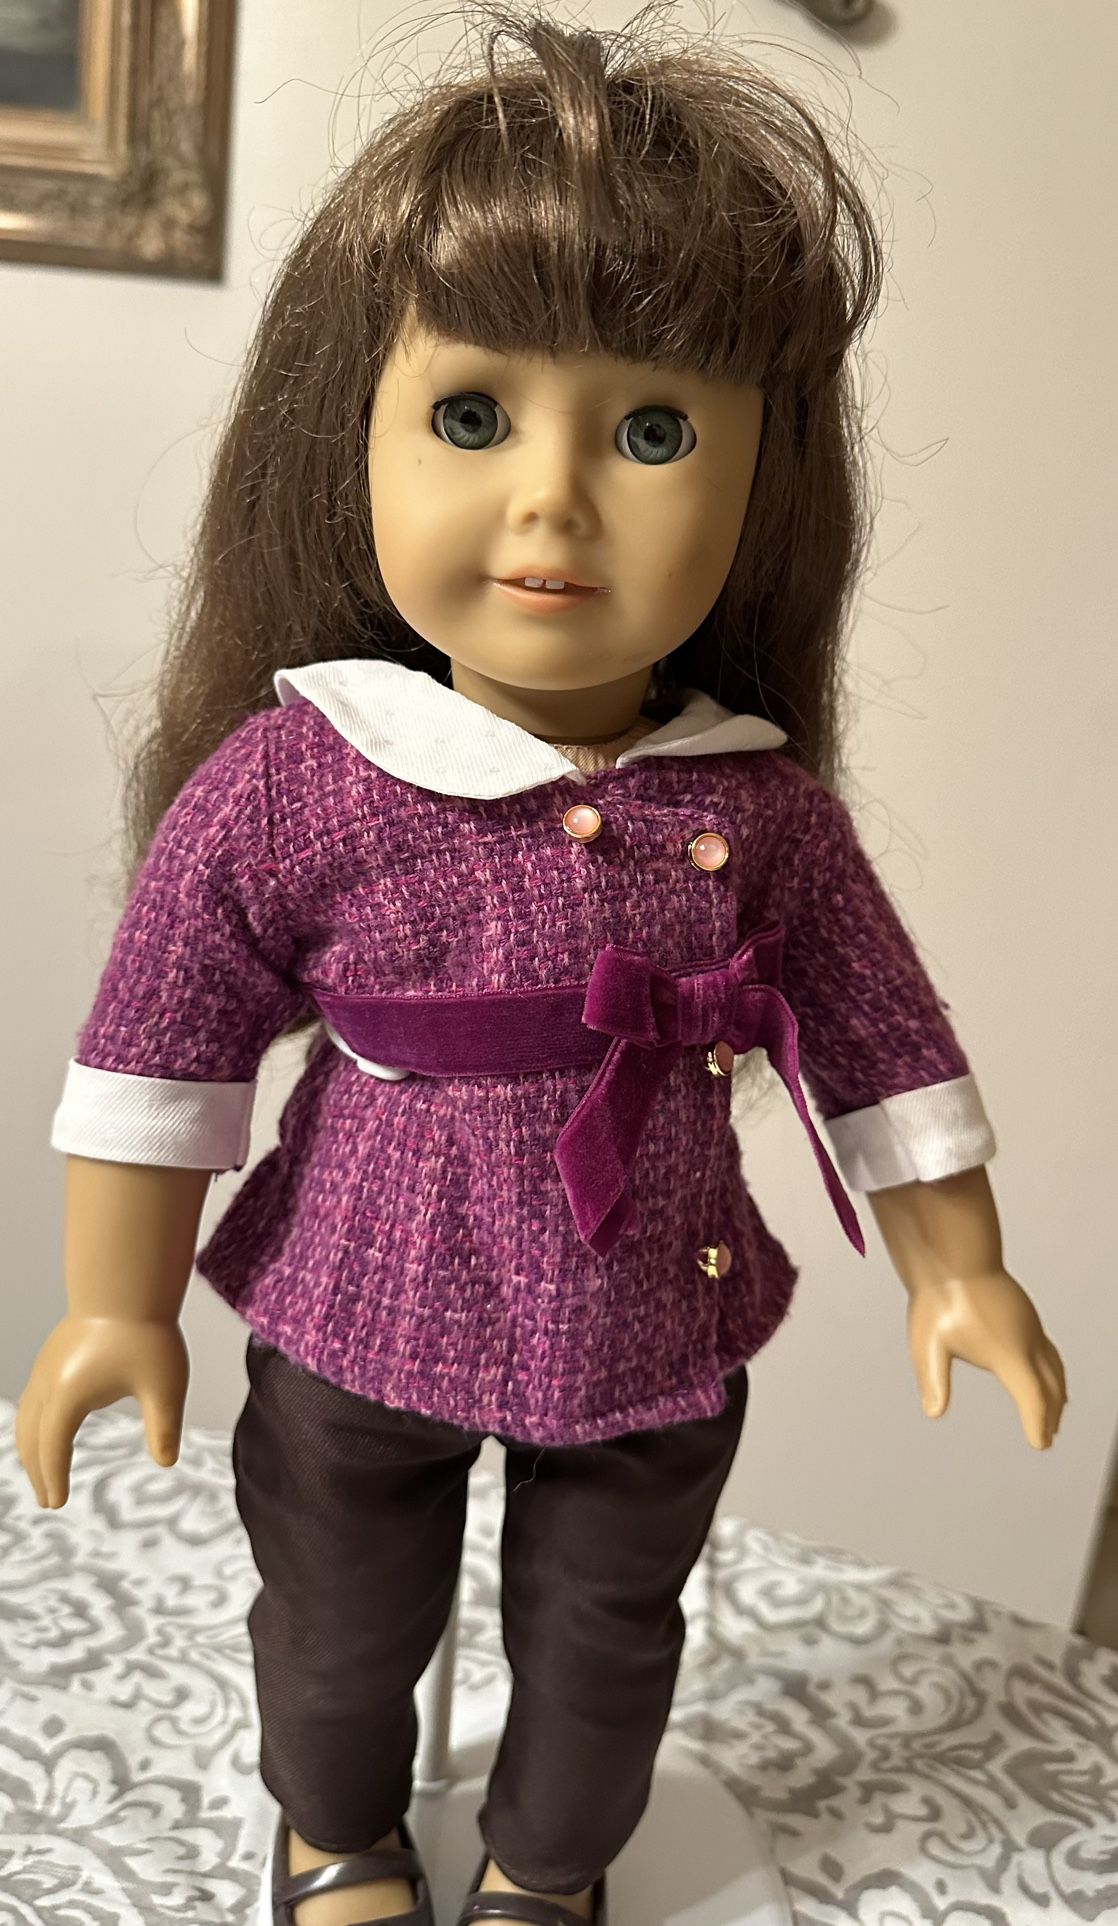 American Girl doll 18" with OG clothing.